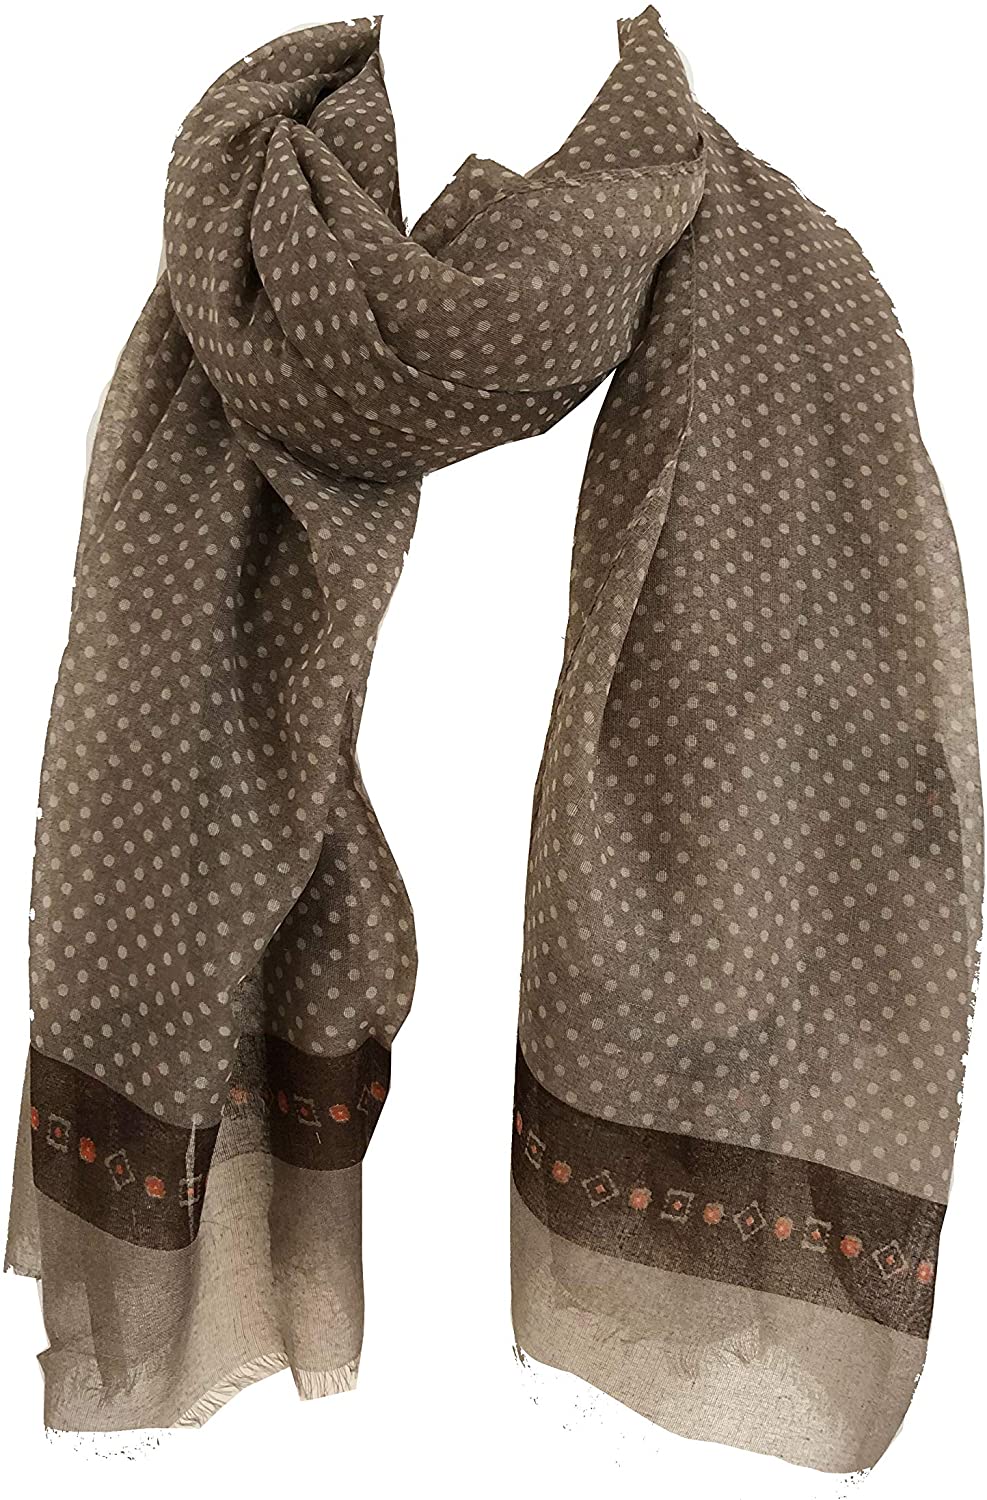 Pamper Yourself Now Dark Brown Scarf with Dark Brown Spotty Scarves with Borders, Long, Soft, Pretty Scarf/Wrap